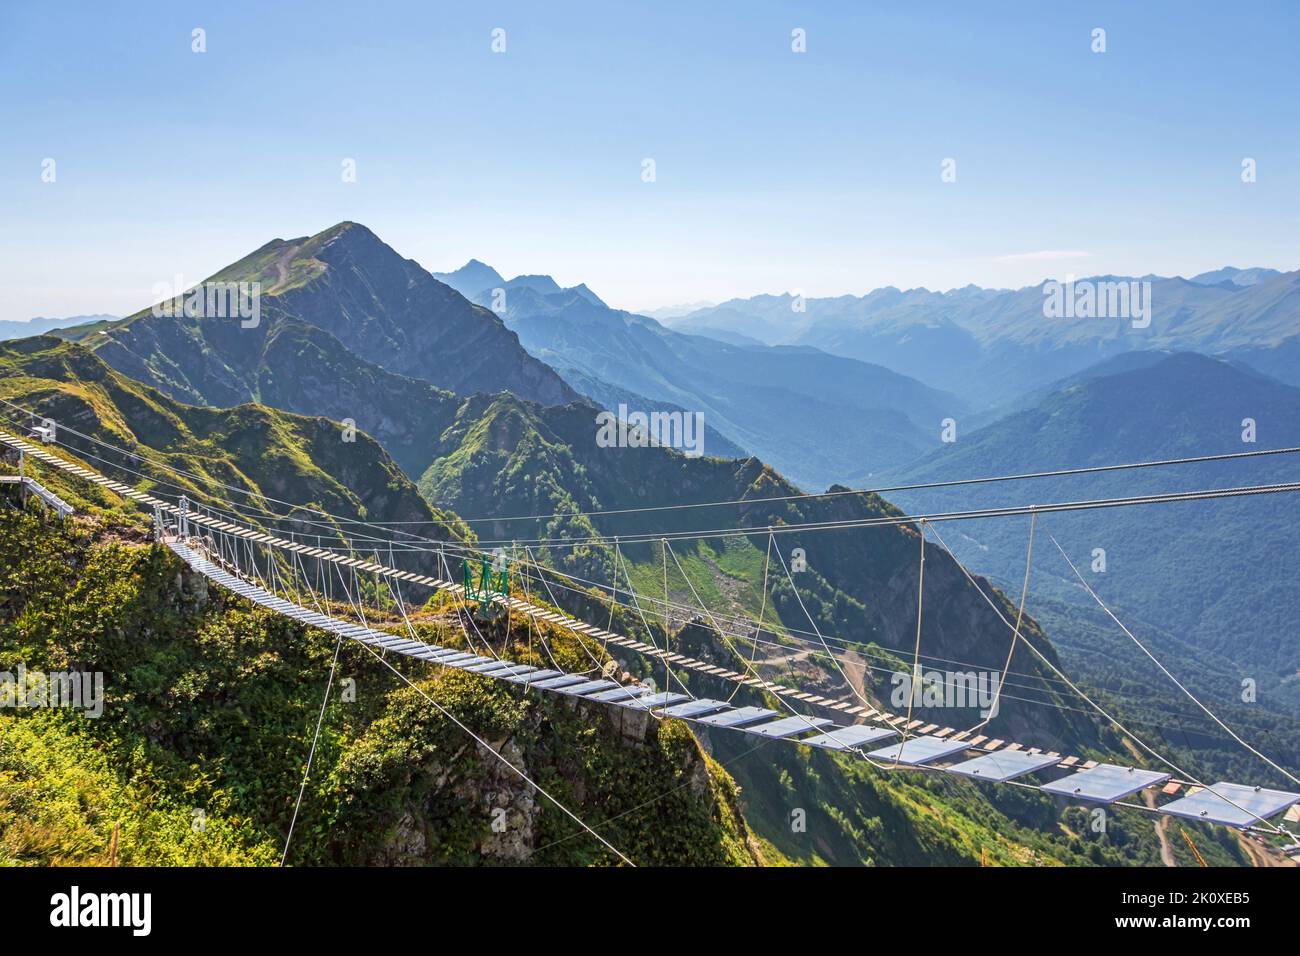 Suspension bridge with transparent floors is suspended in the mountains over an abyss. Away against the backdrop of the peak of the peak of the mounta Stock Photo